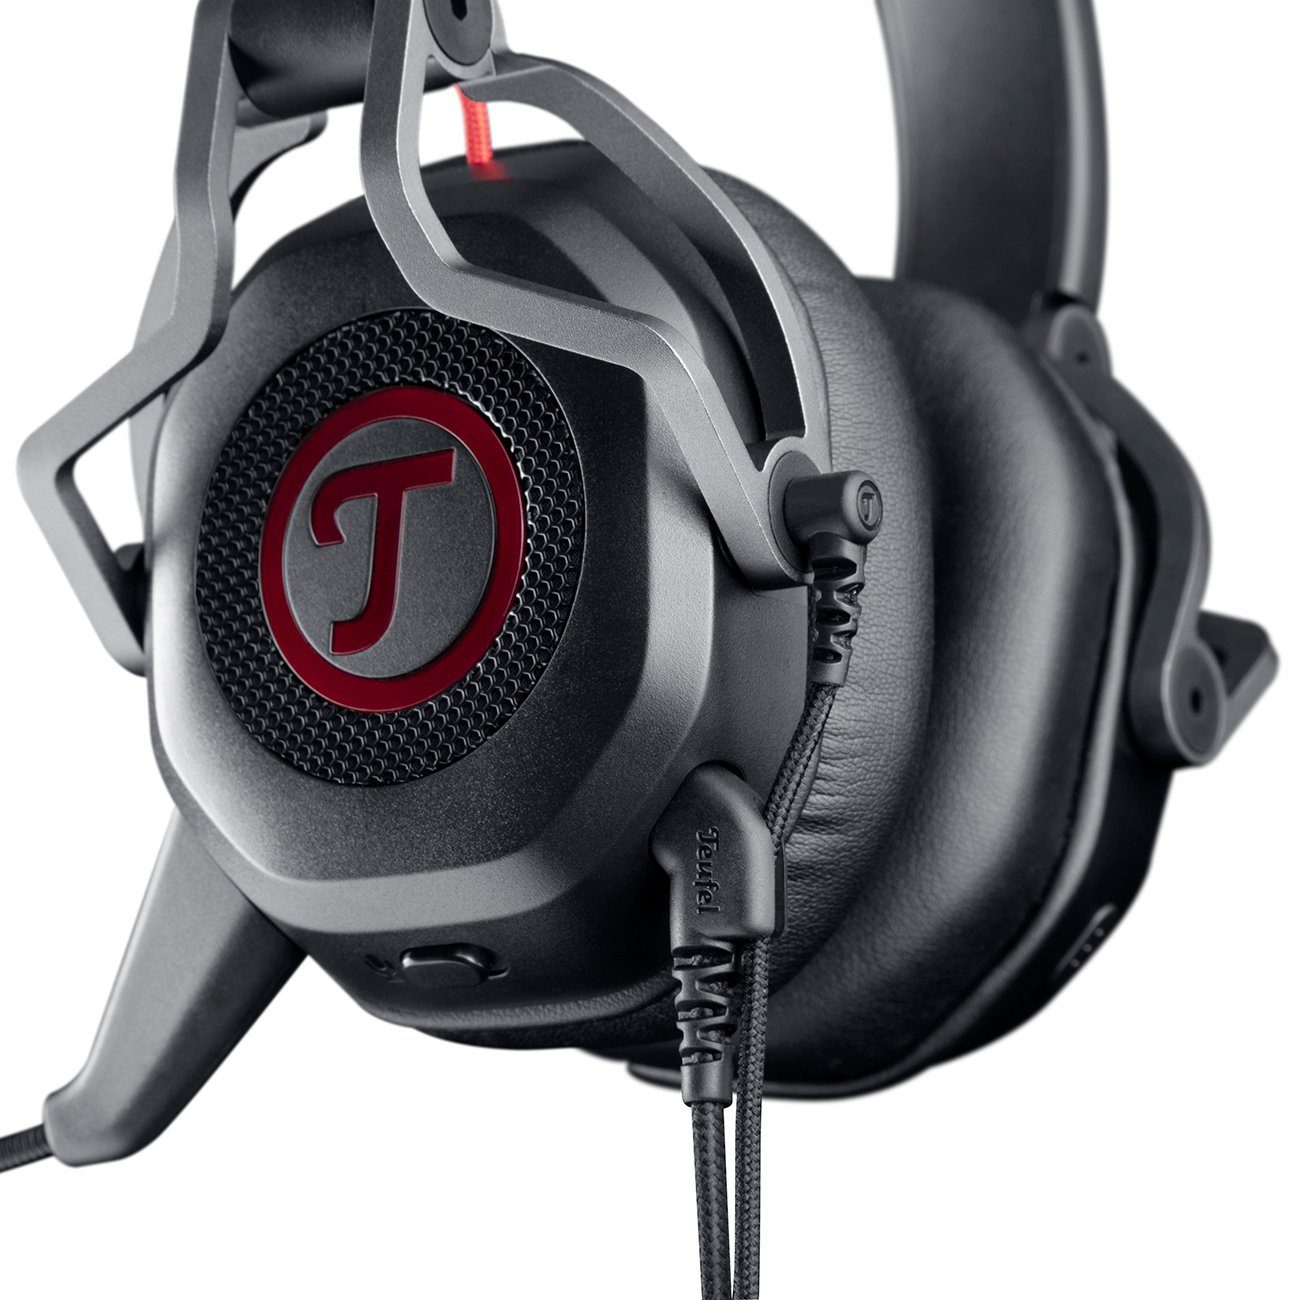 USB-Soundkarte) integrierter Teufel Gaming-Headset CAGE (mit